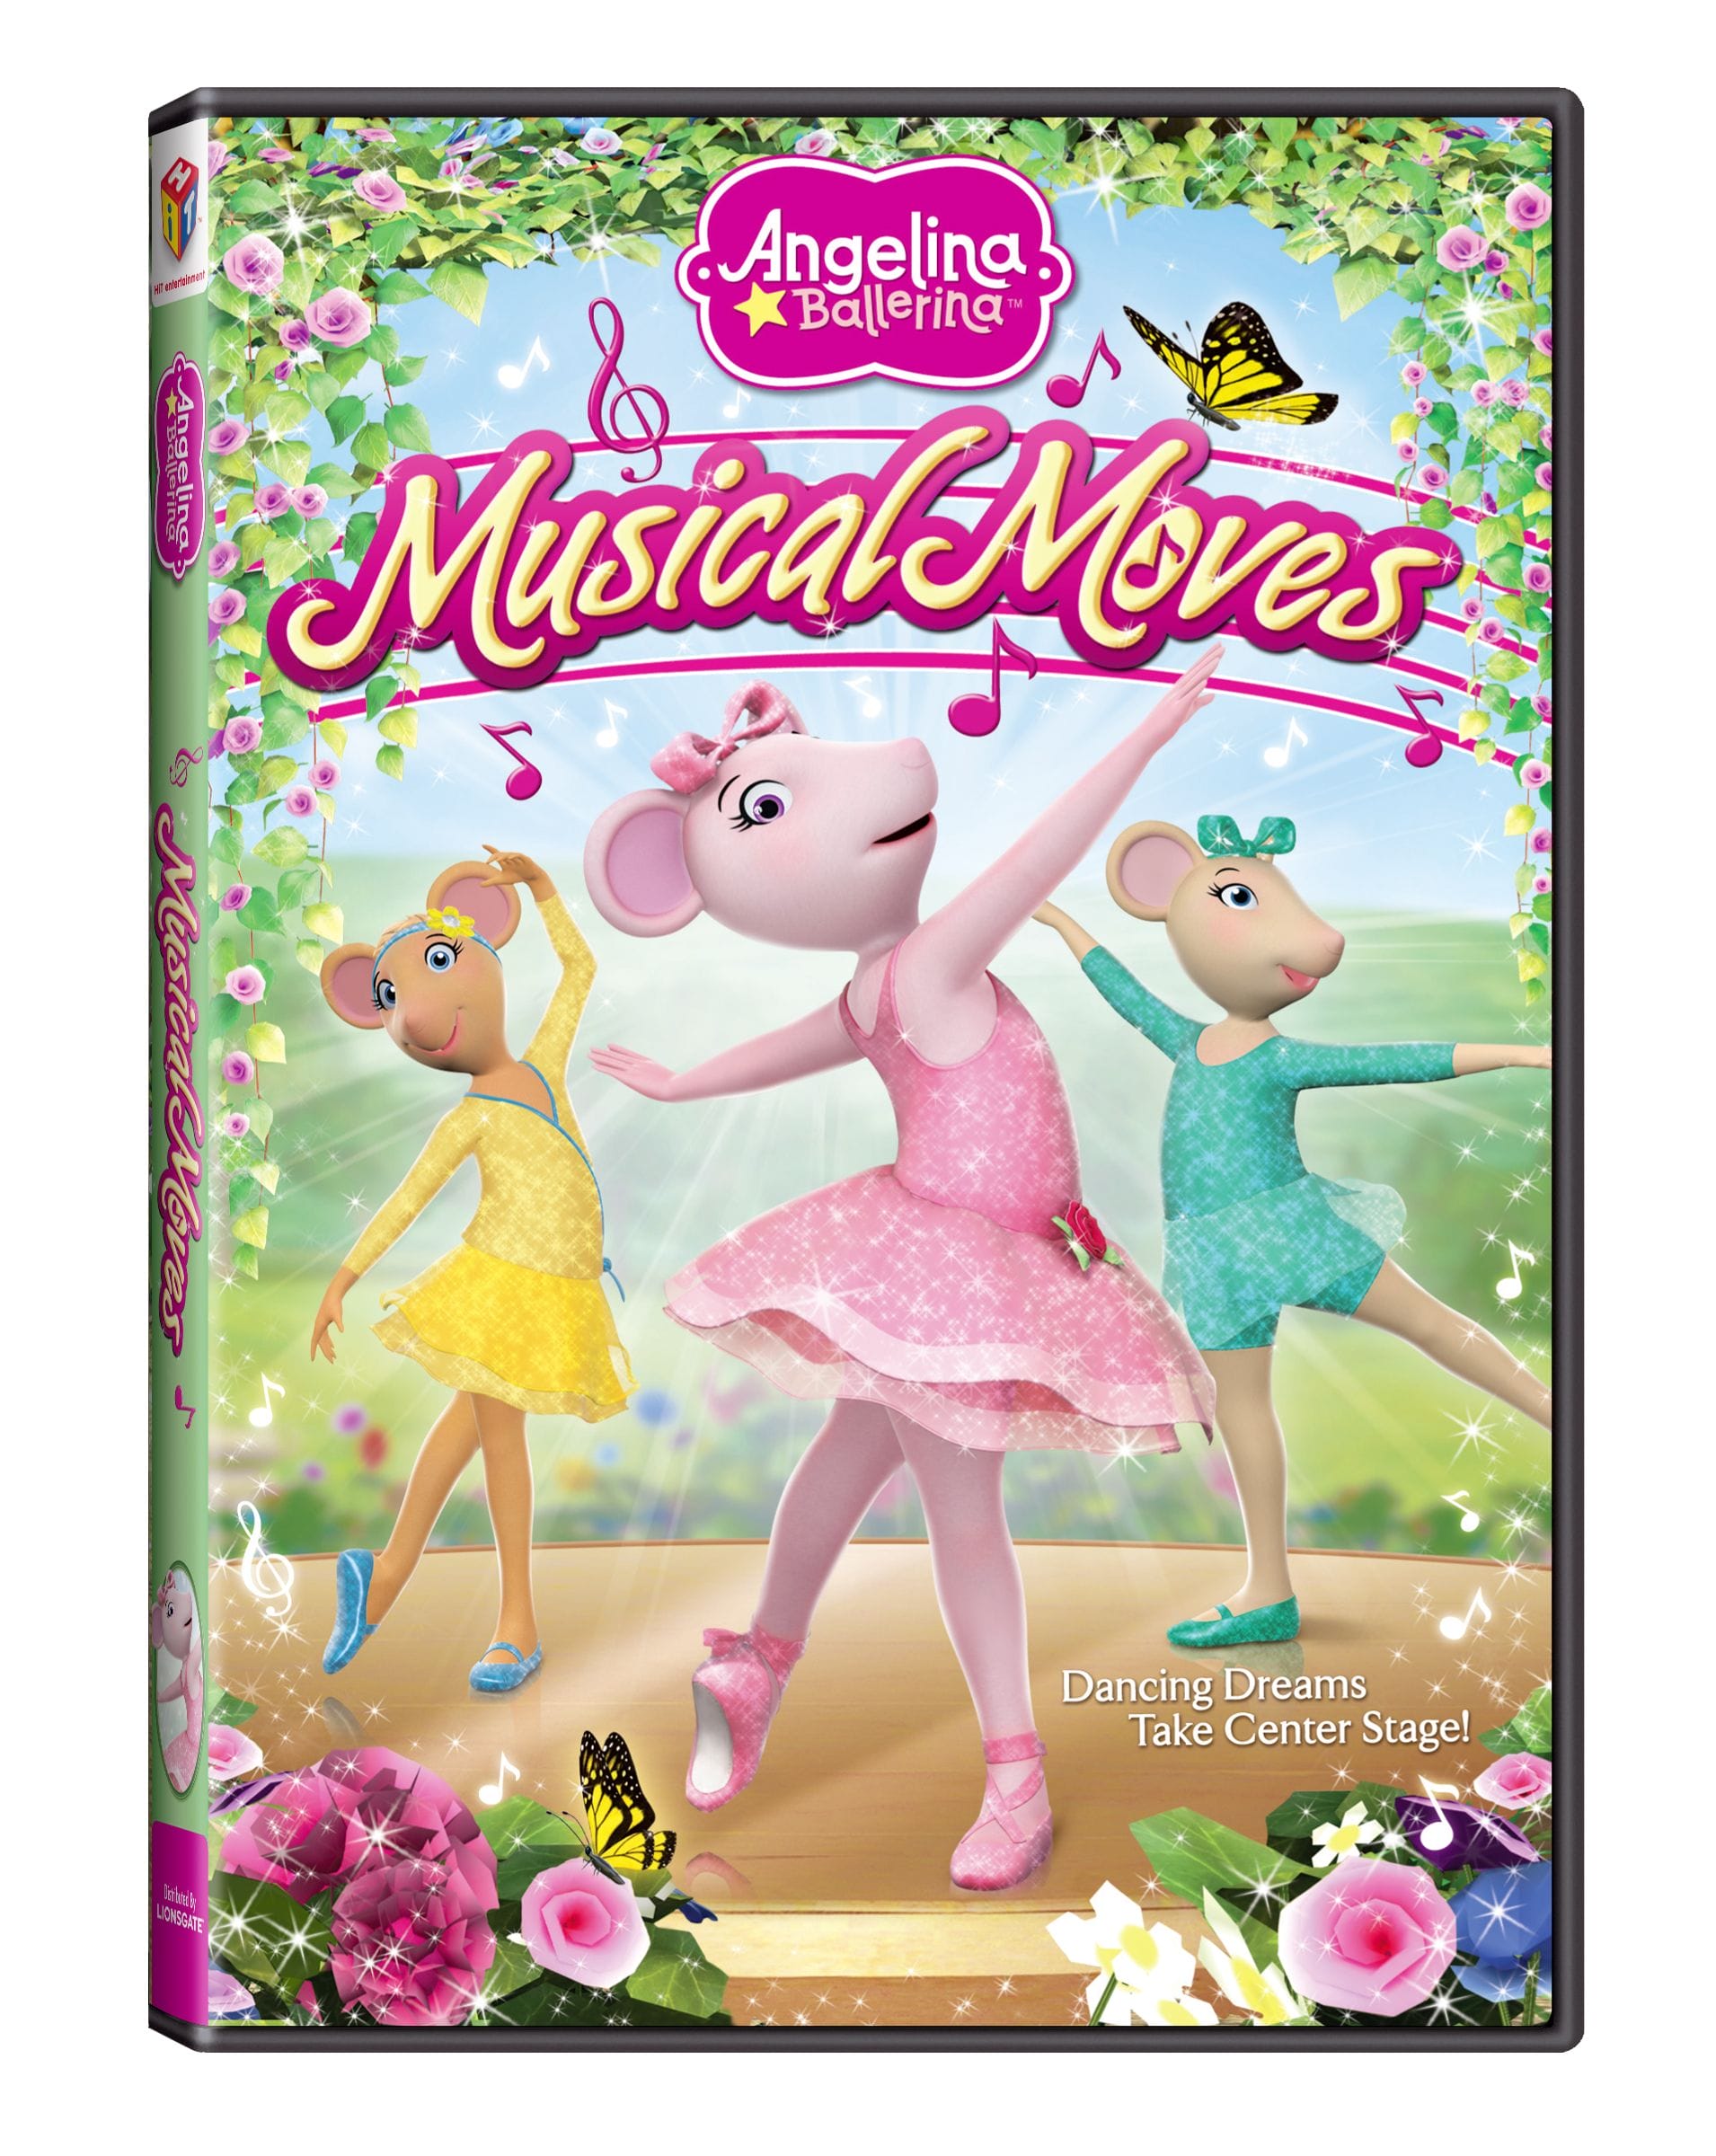 Angelina Ballerina Musical Moves DVD Review and Giveaway.